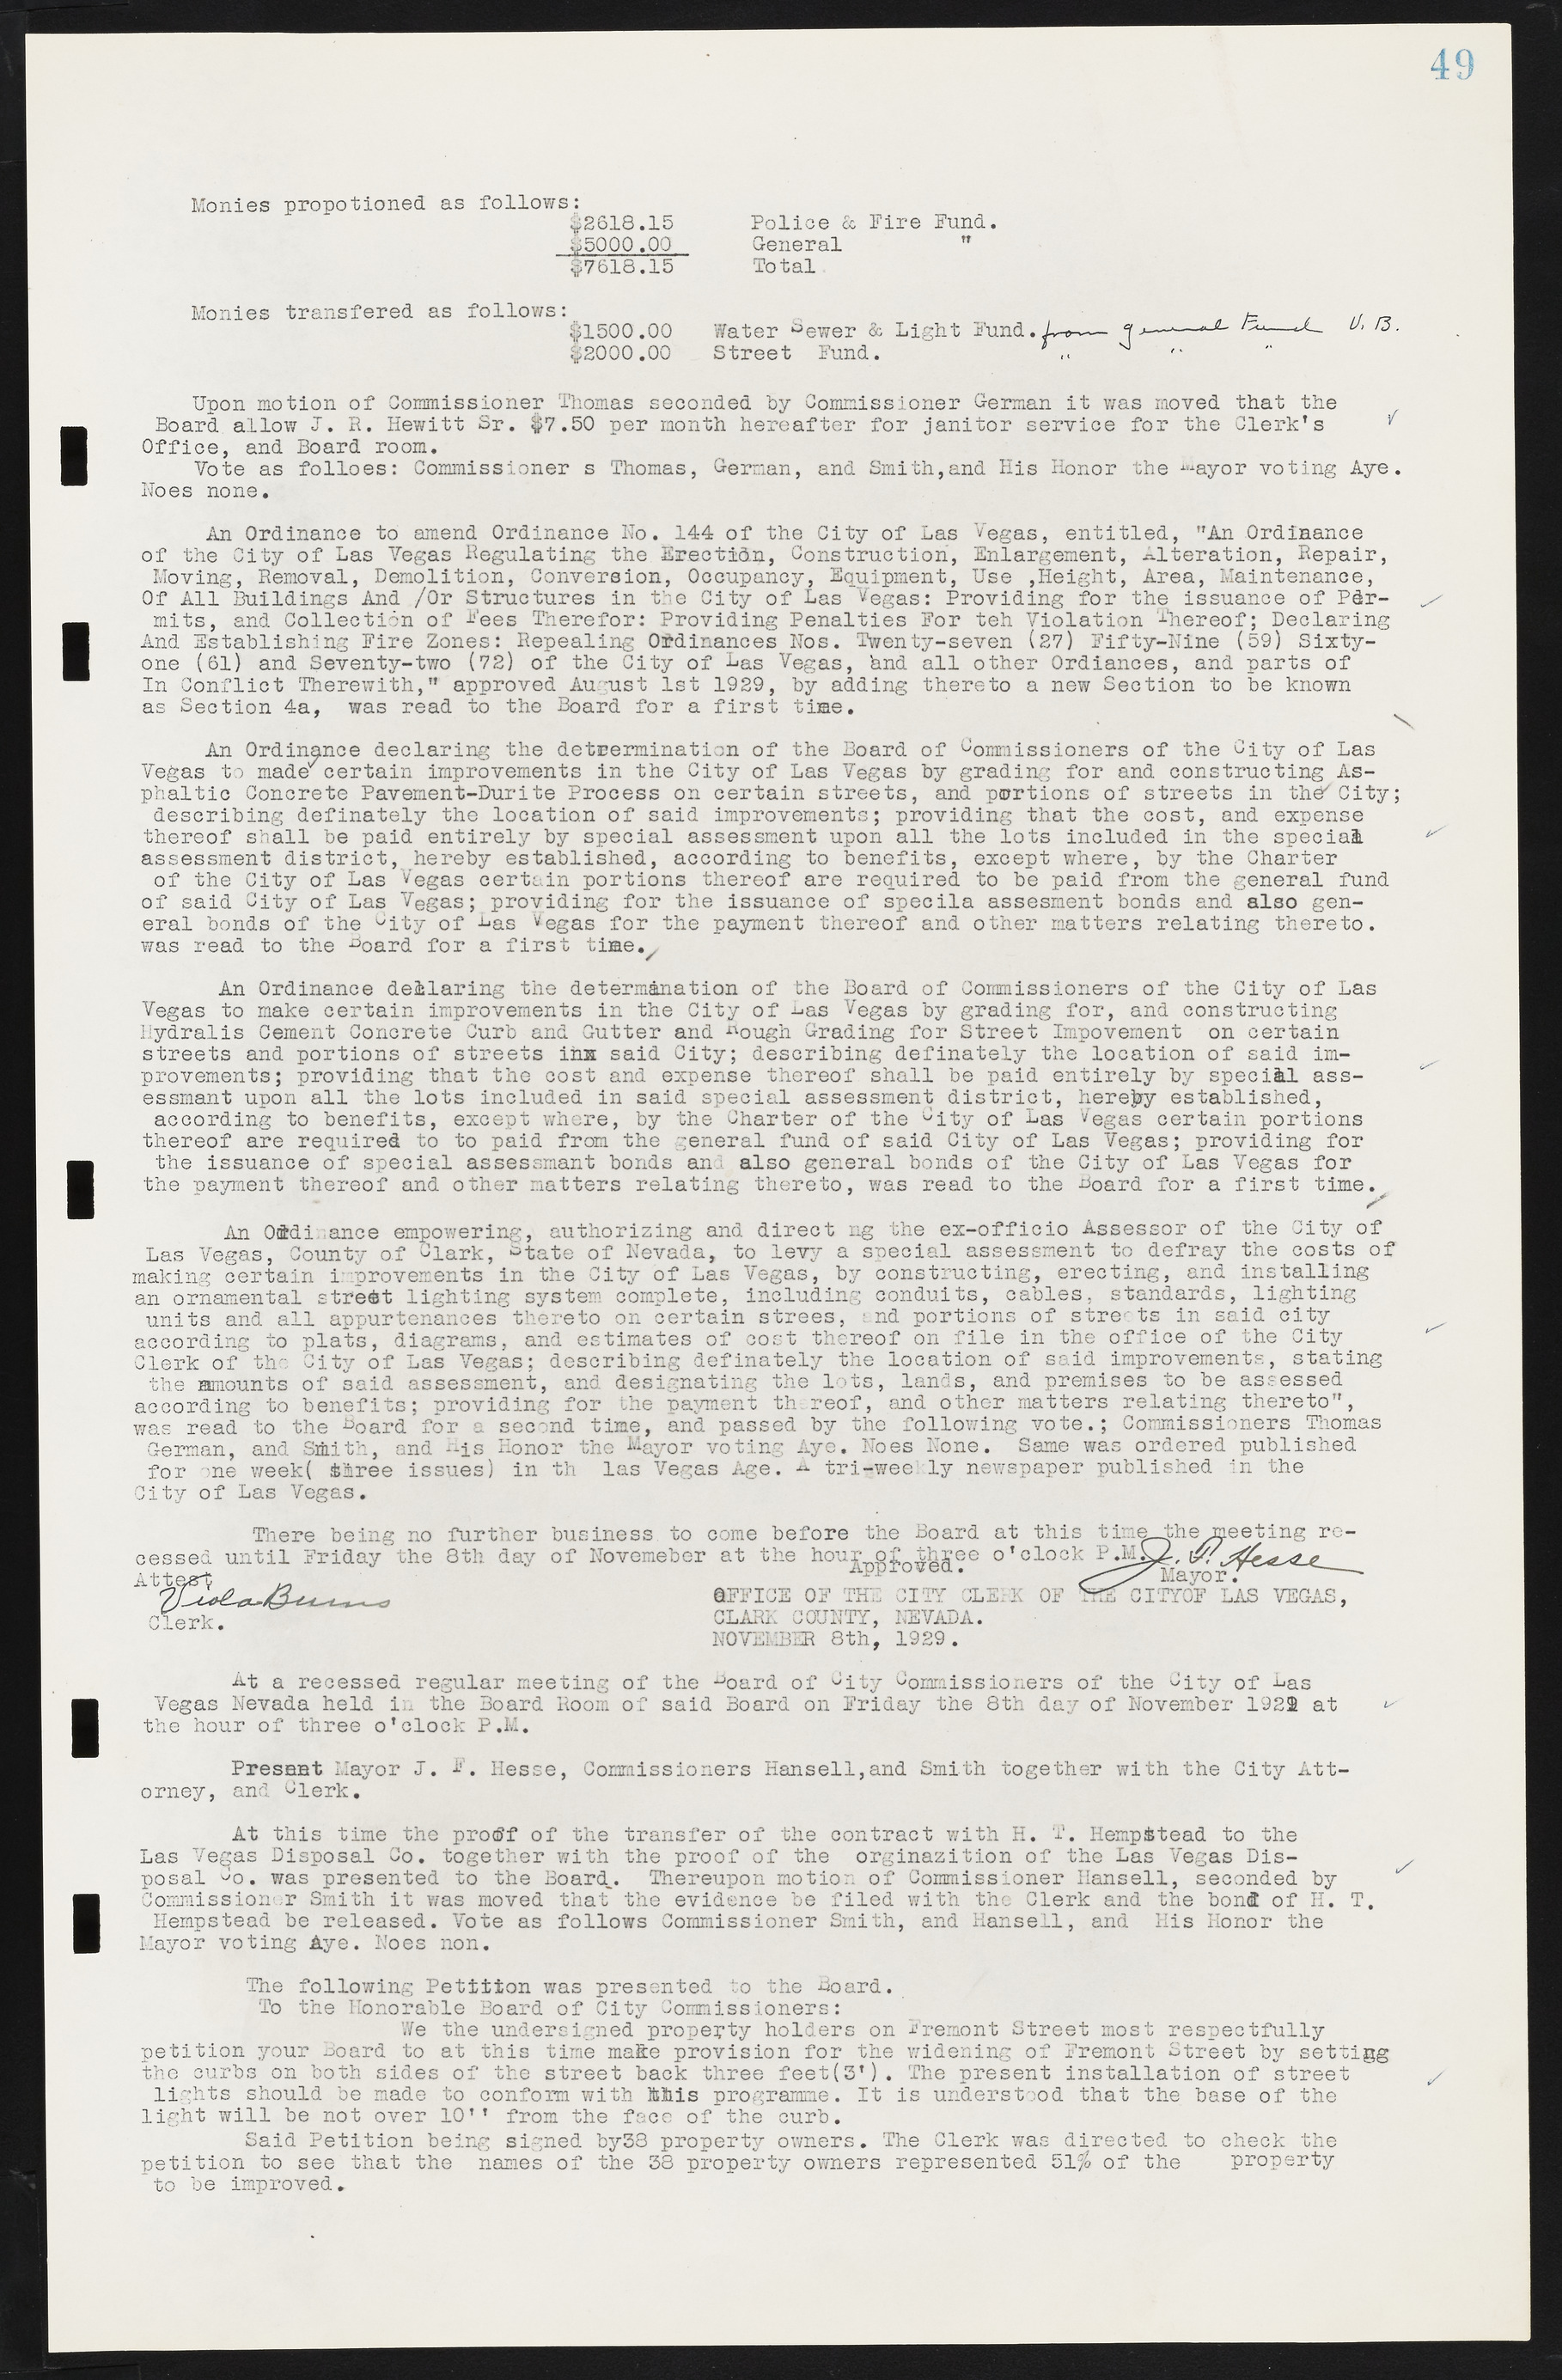 Las Vegas City Commission Minutes, May 14, 1929 to February 11, 1937, lvc000003-55